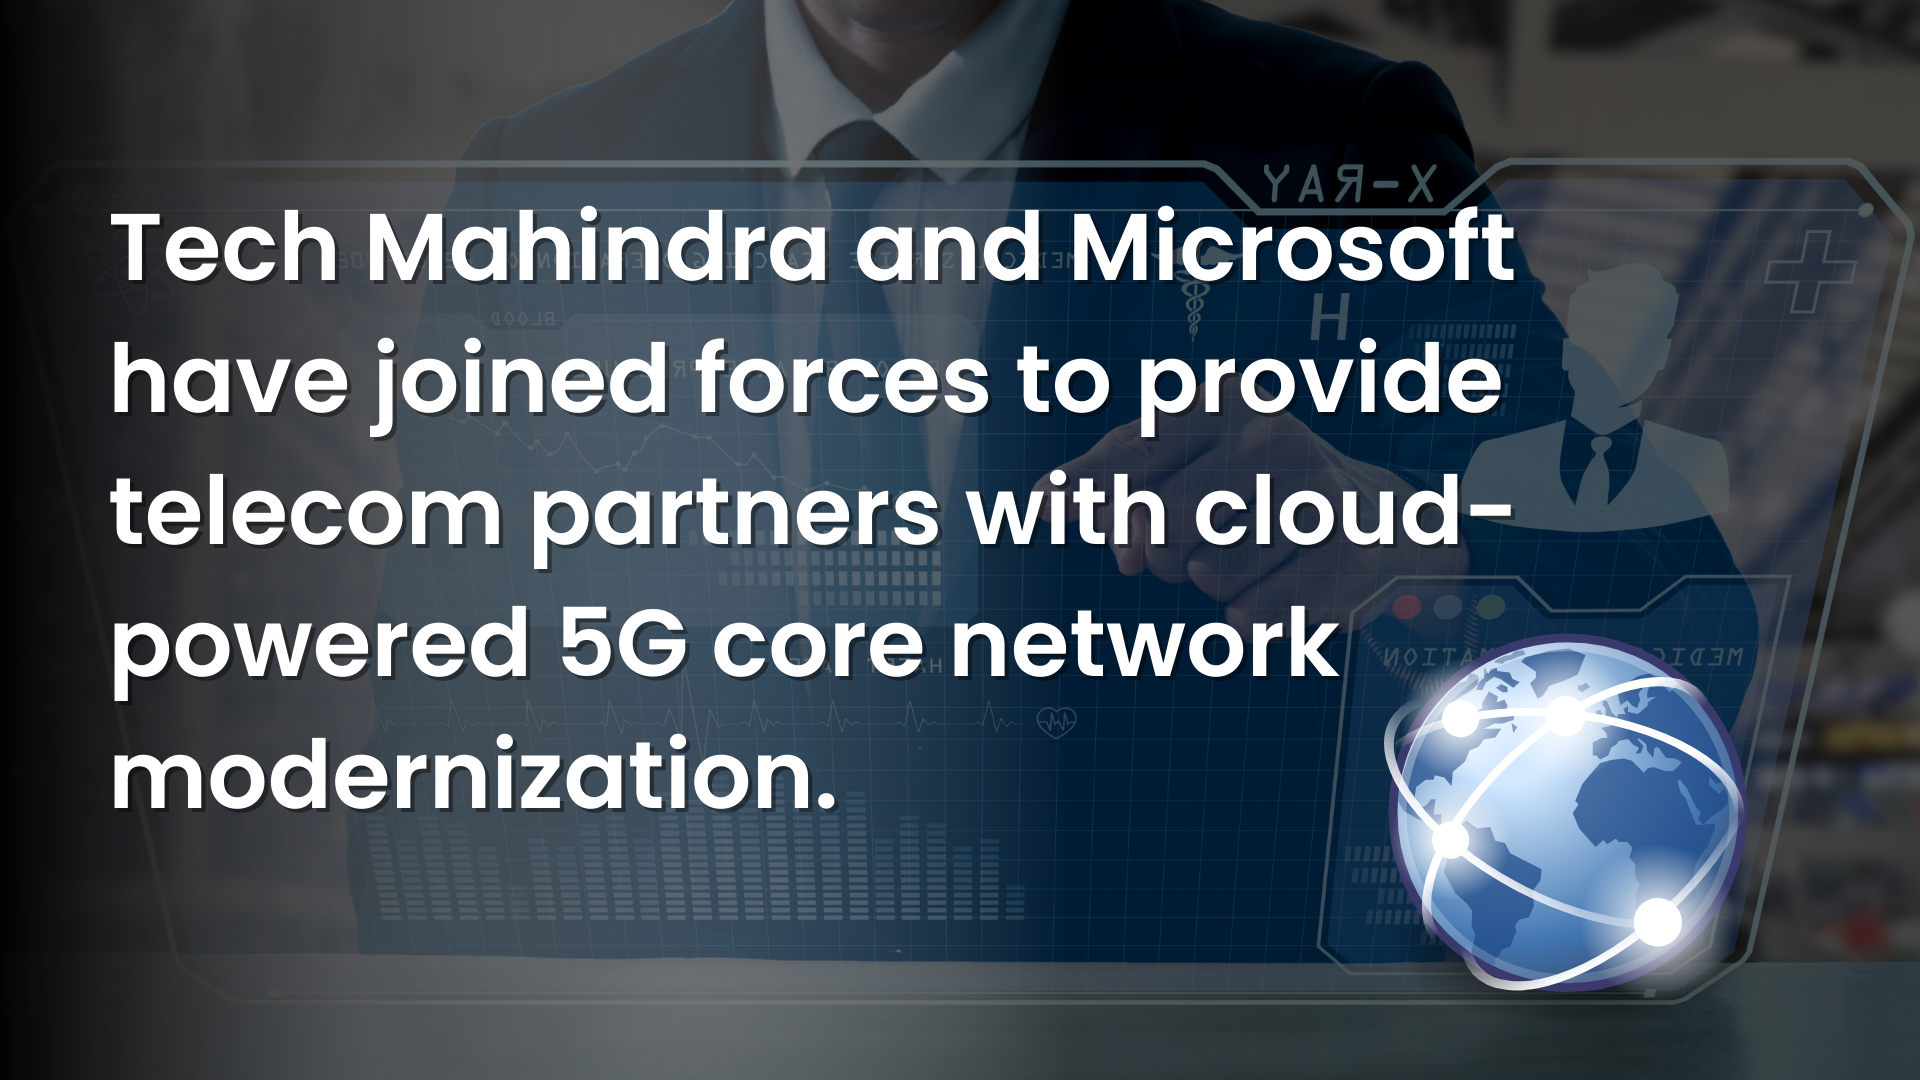 Tech Mahindra And Microsoft Have Joined Forces To Provide Telecom Partners With Cloud-Powered 5G Core Network Modernization.